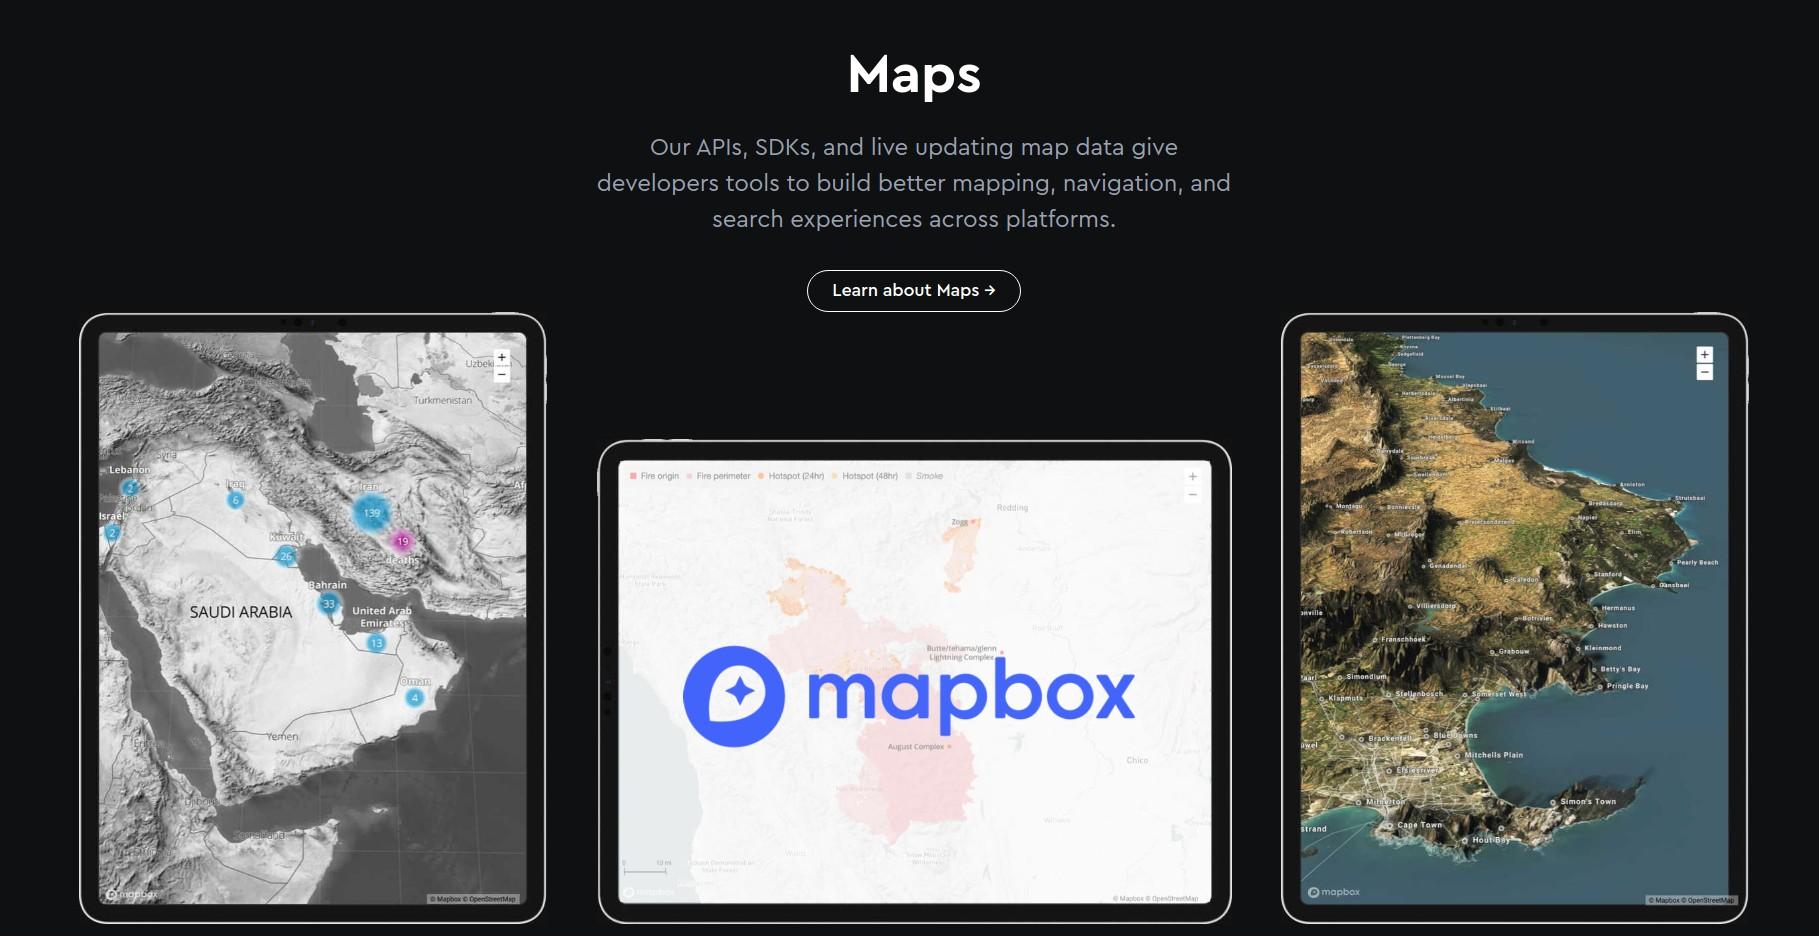 Picture showing Mapbox's website and logo